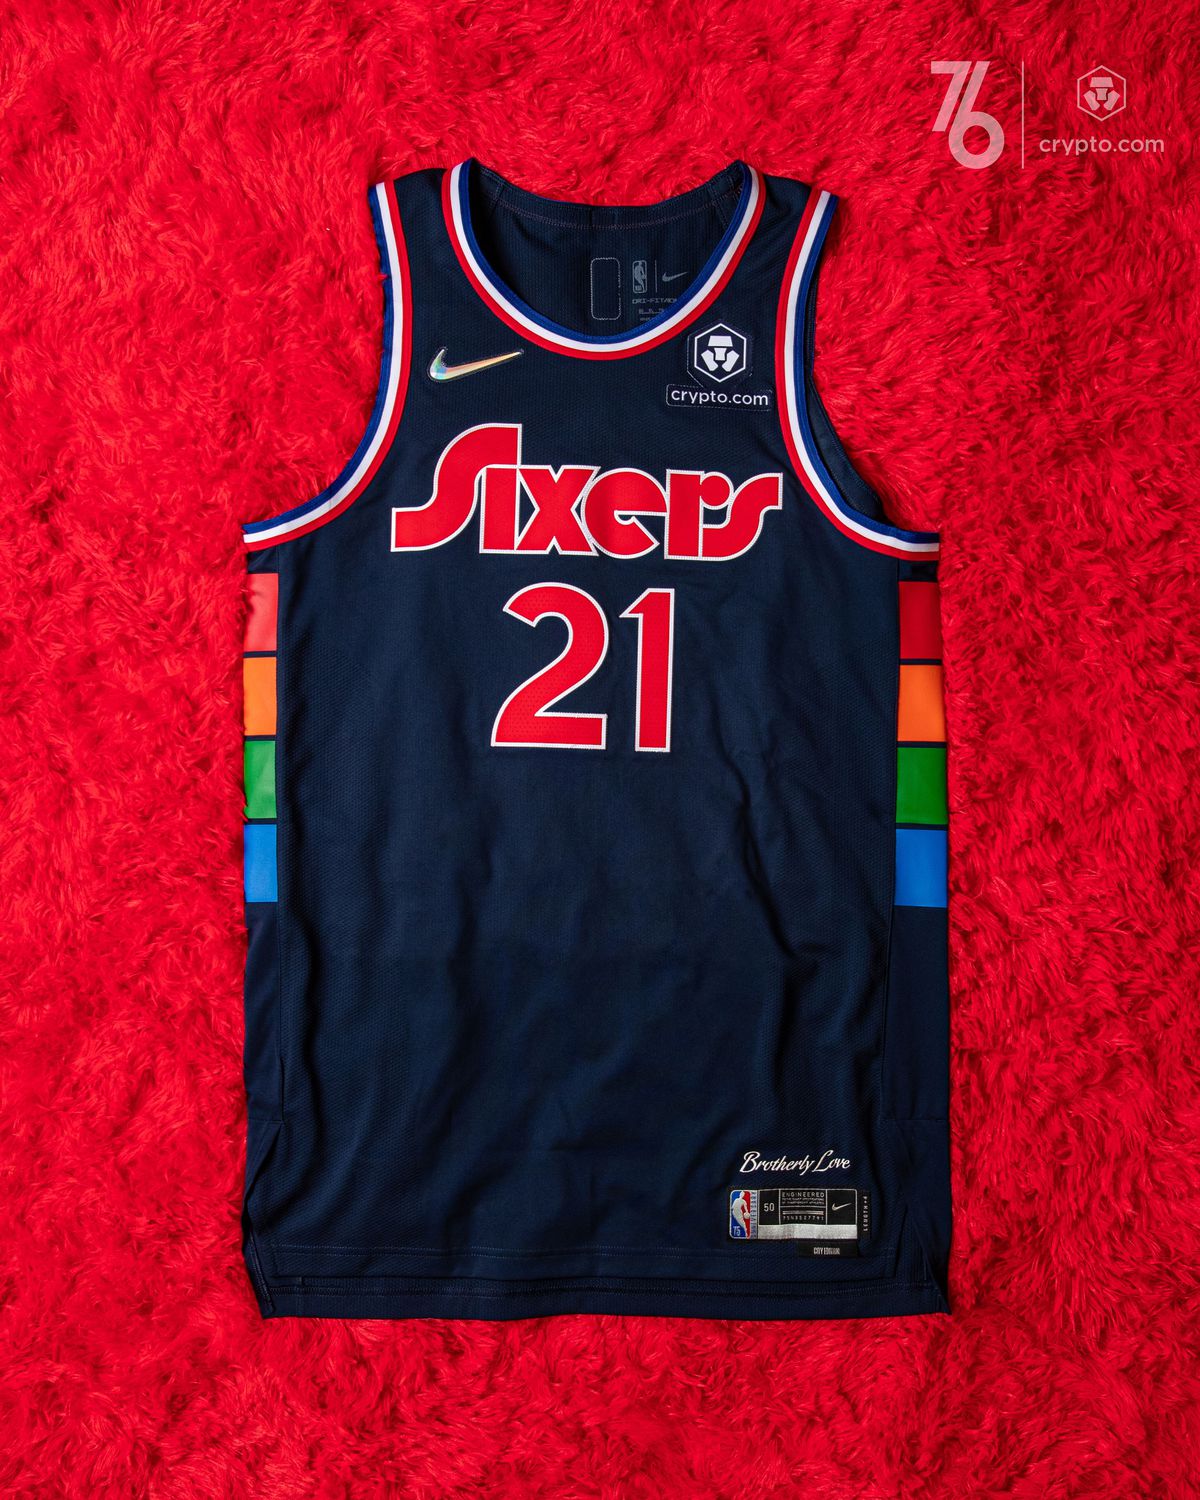 sixers navy jersey